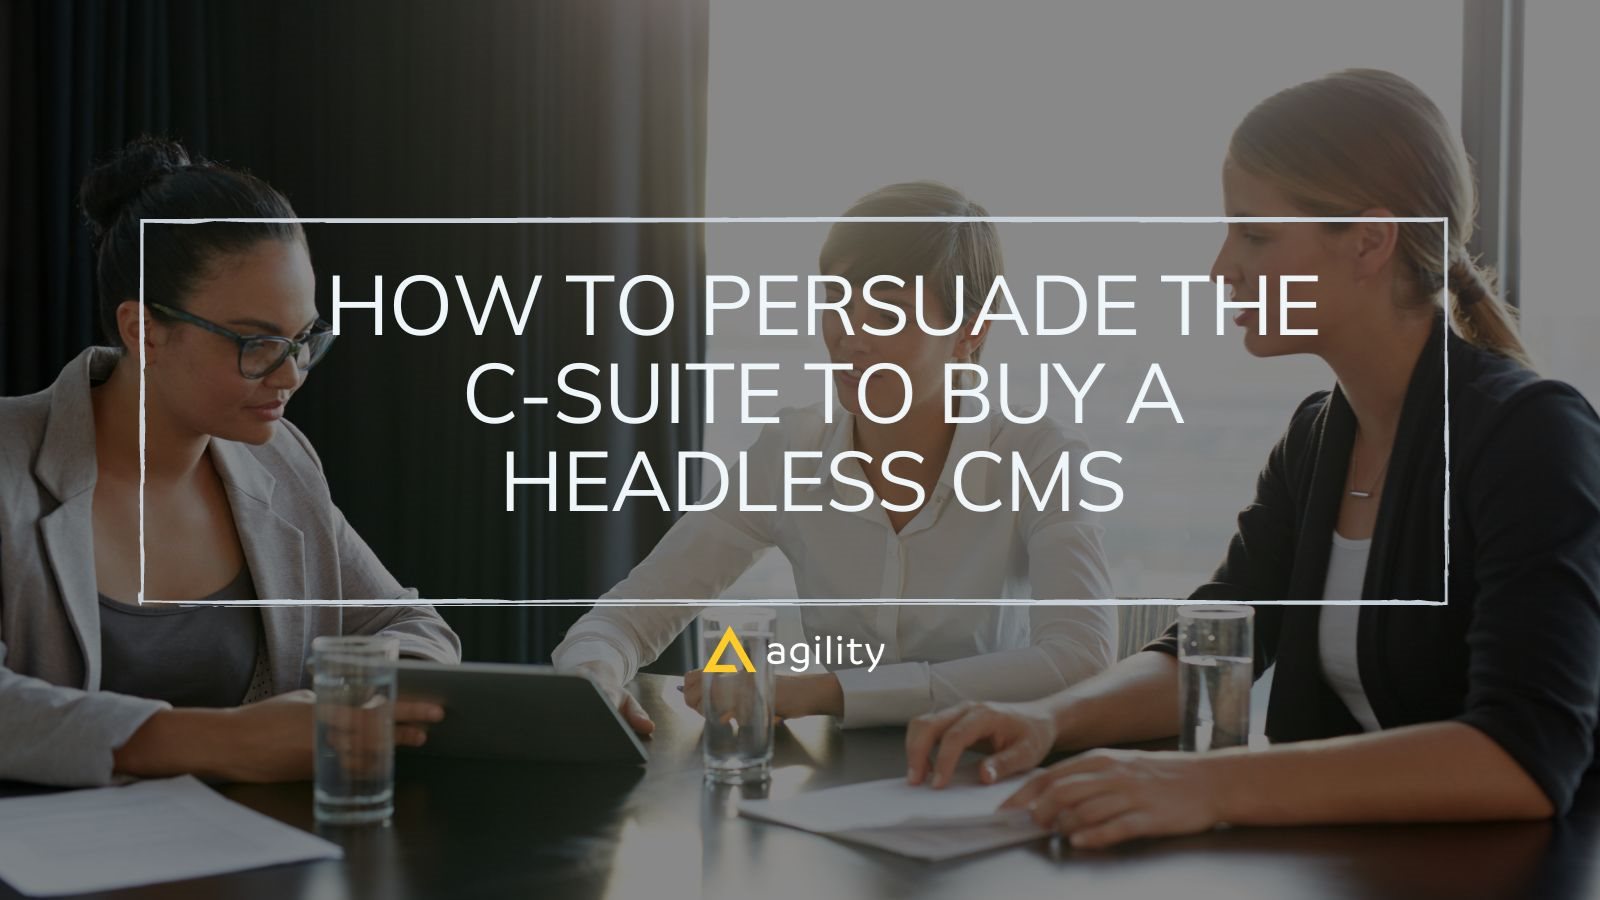 Persuade C-Suite on Headless CMS- How to